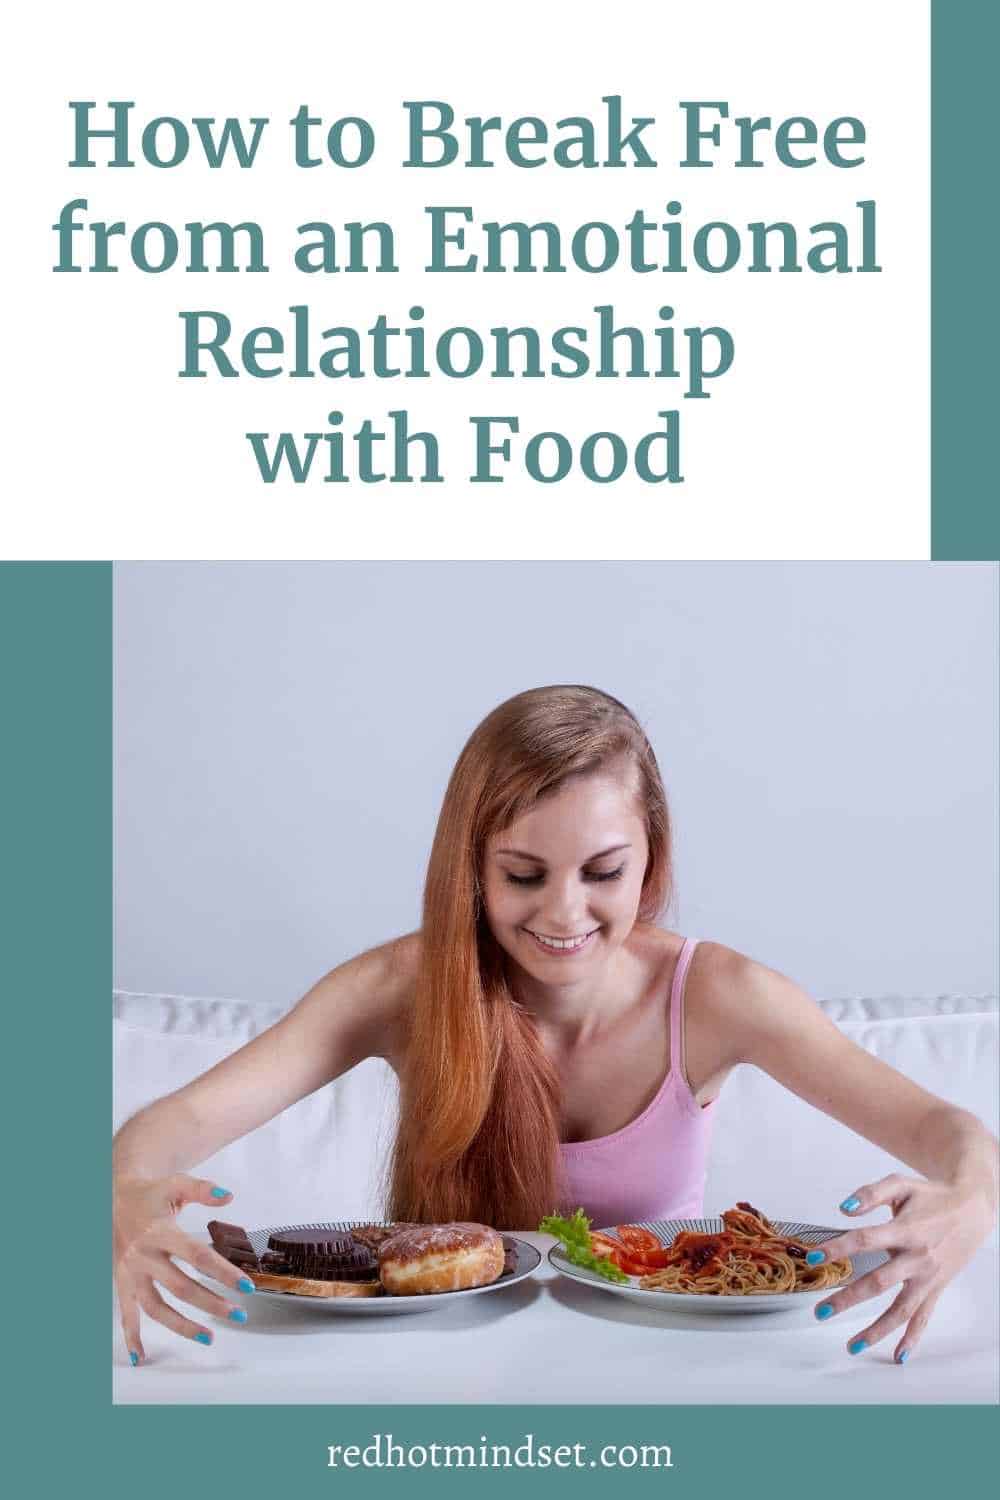 Breaking Free from an Emotional Relationship with Food